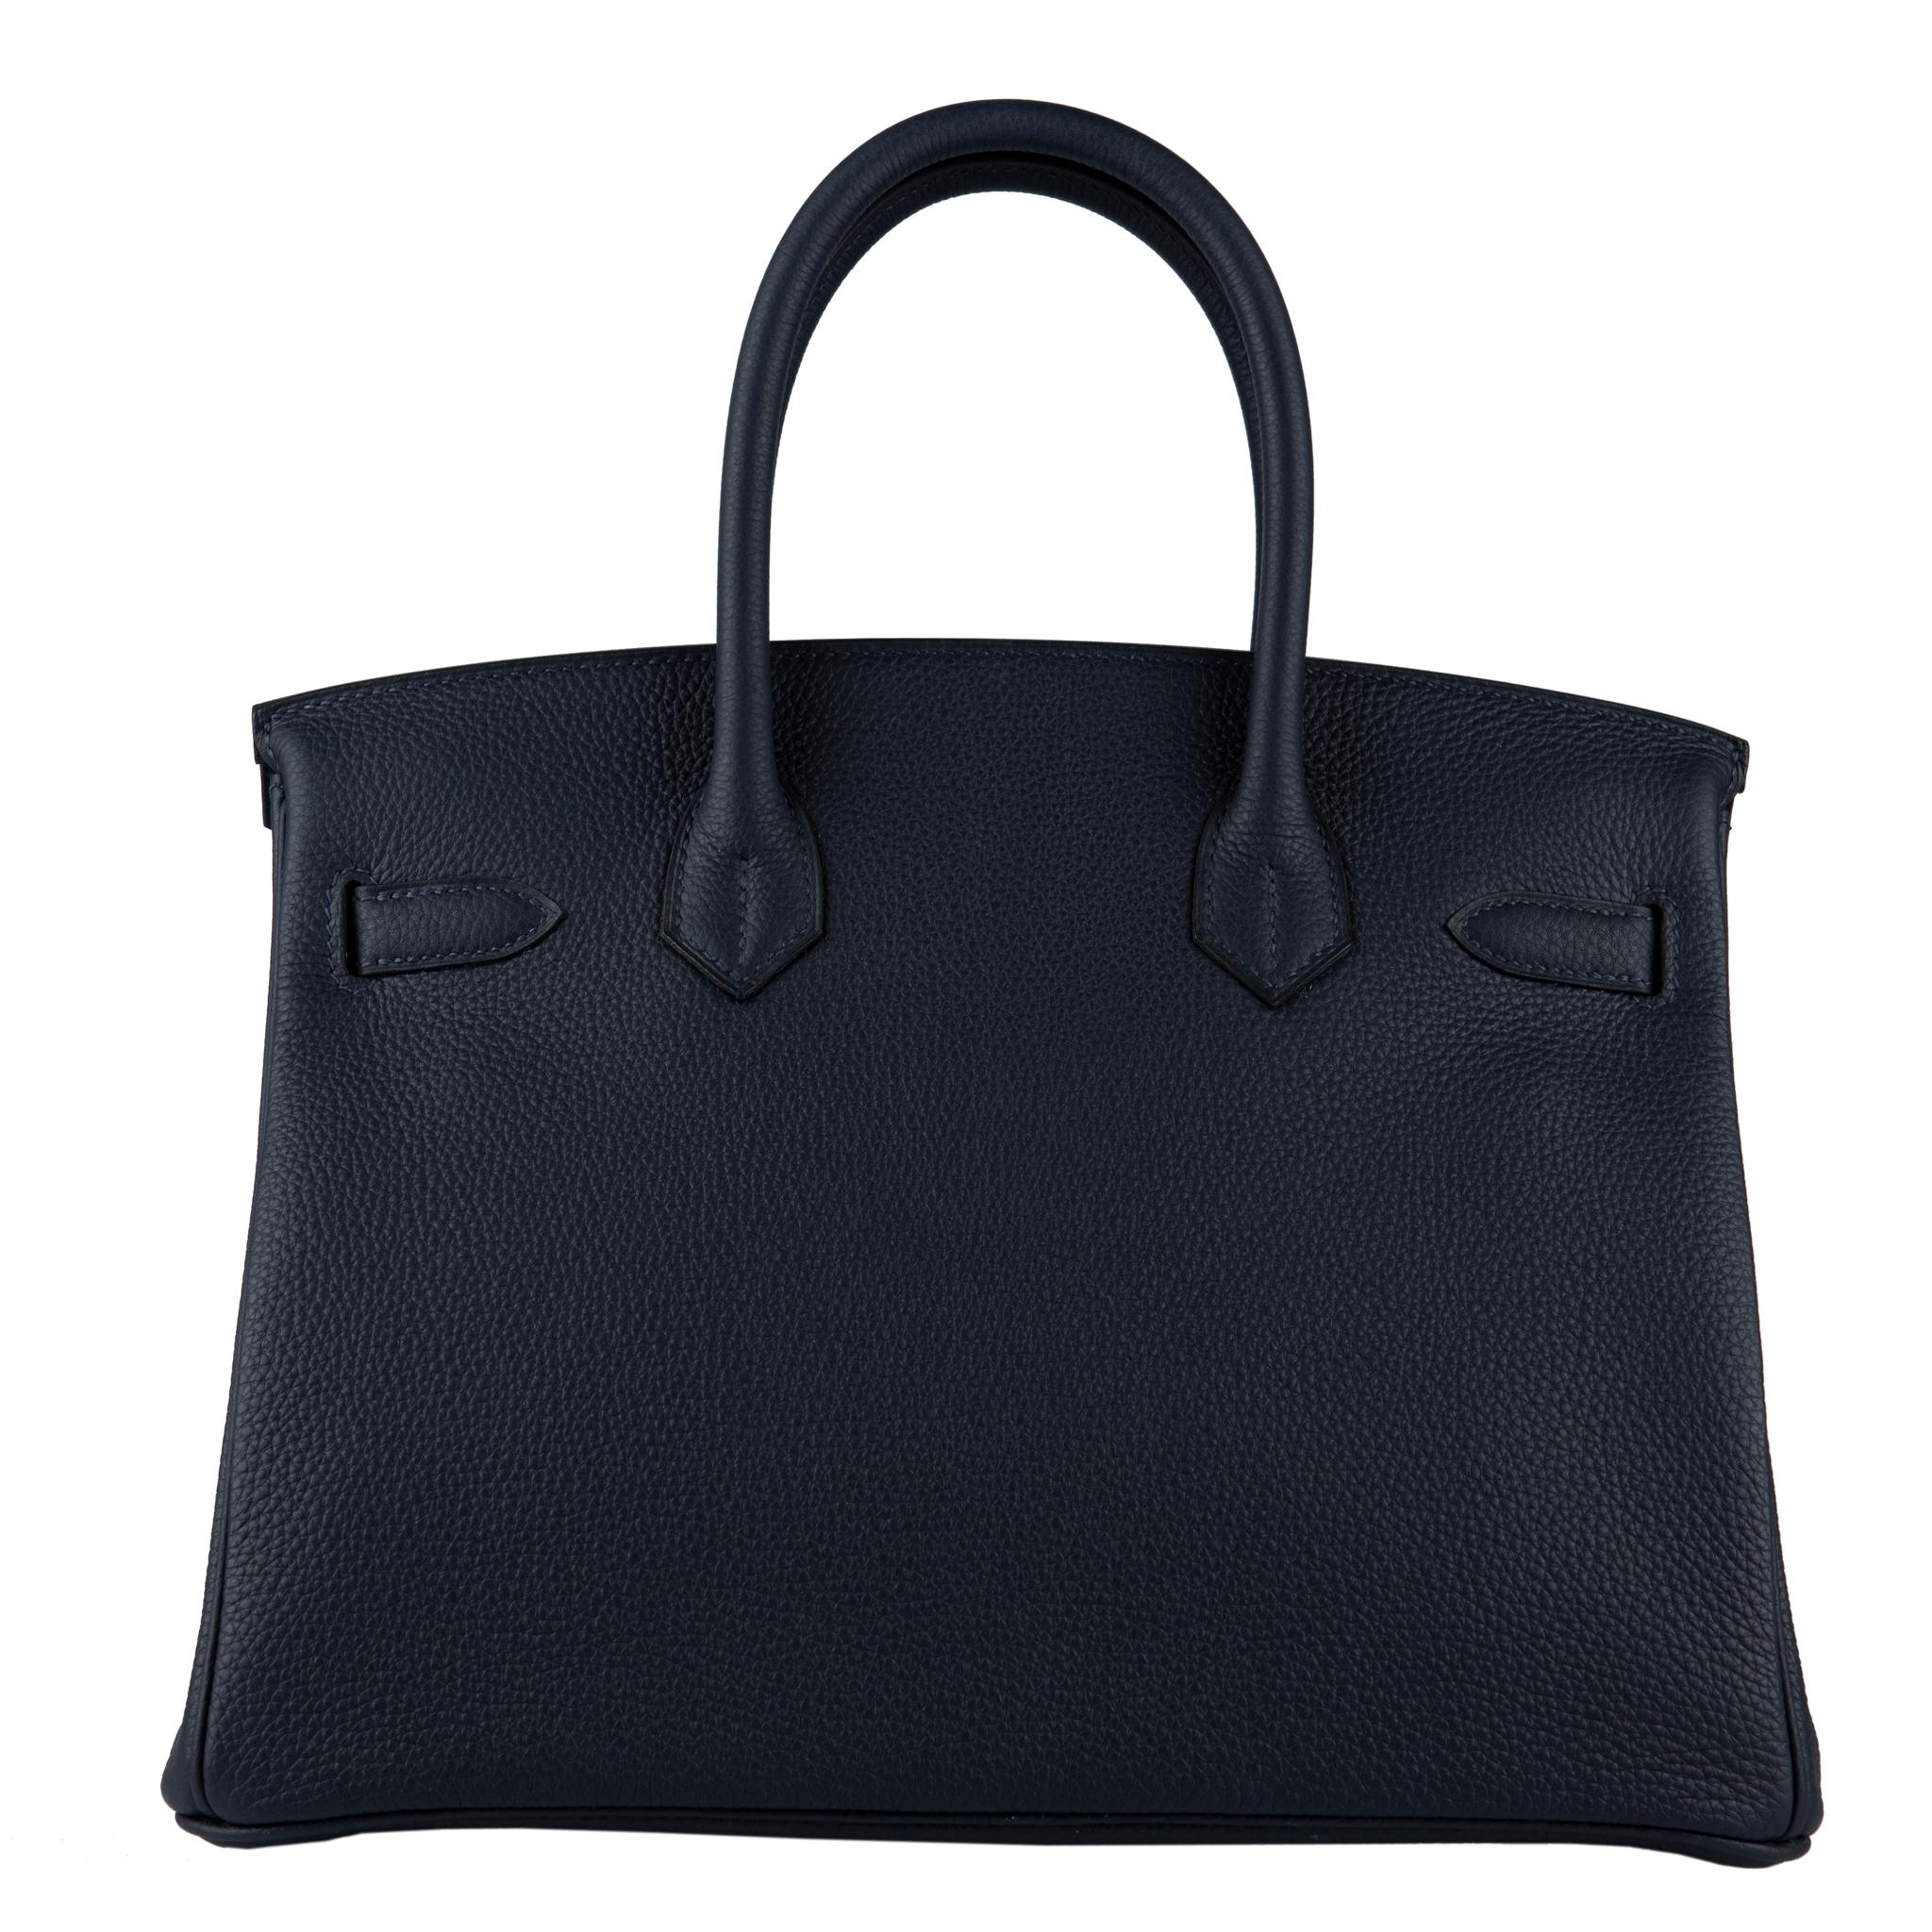 Brand: Hermès 
Style: Birkin 
Size: 30cm
Color: Blue Nuit
Leather: Togo 
Hardware: Gold
Stamp: 2019 D

Condition: Pristine, never carried: The item has never been carried and is in pristine condition complete with all accessories.

Accompanied by: